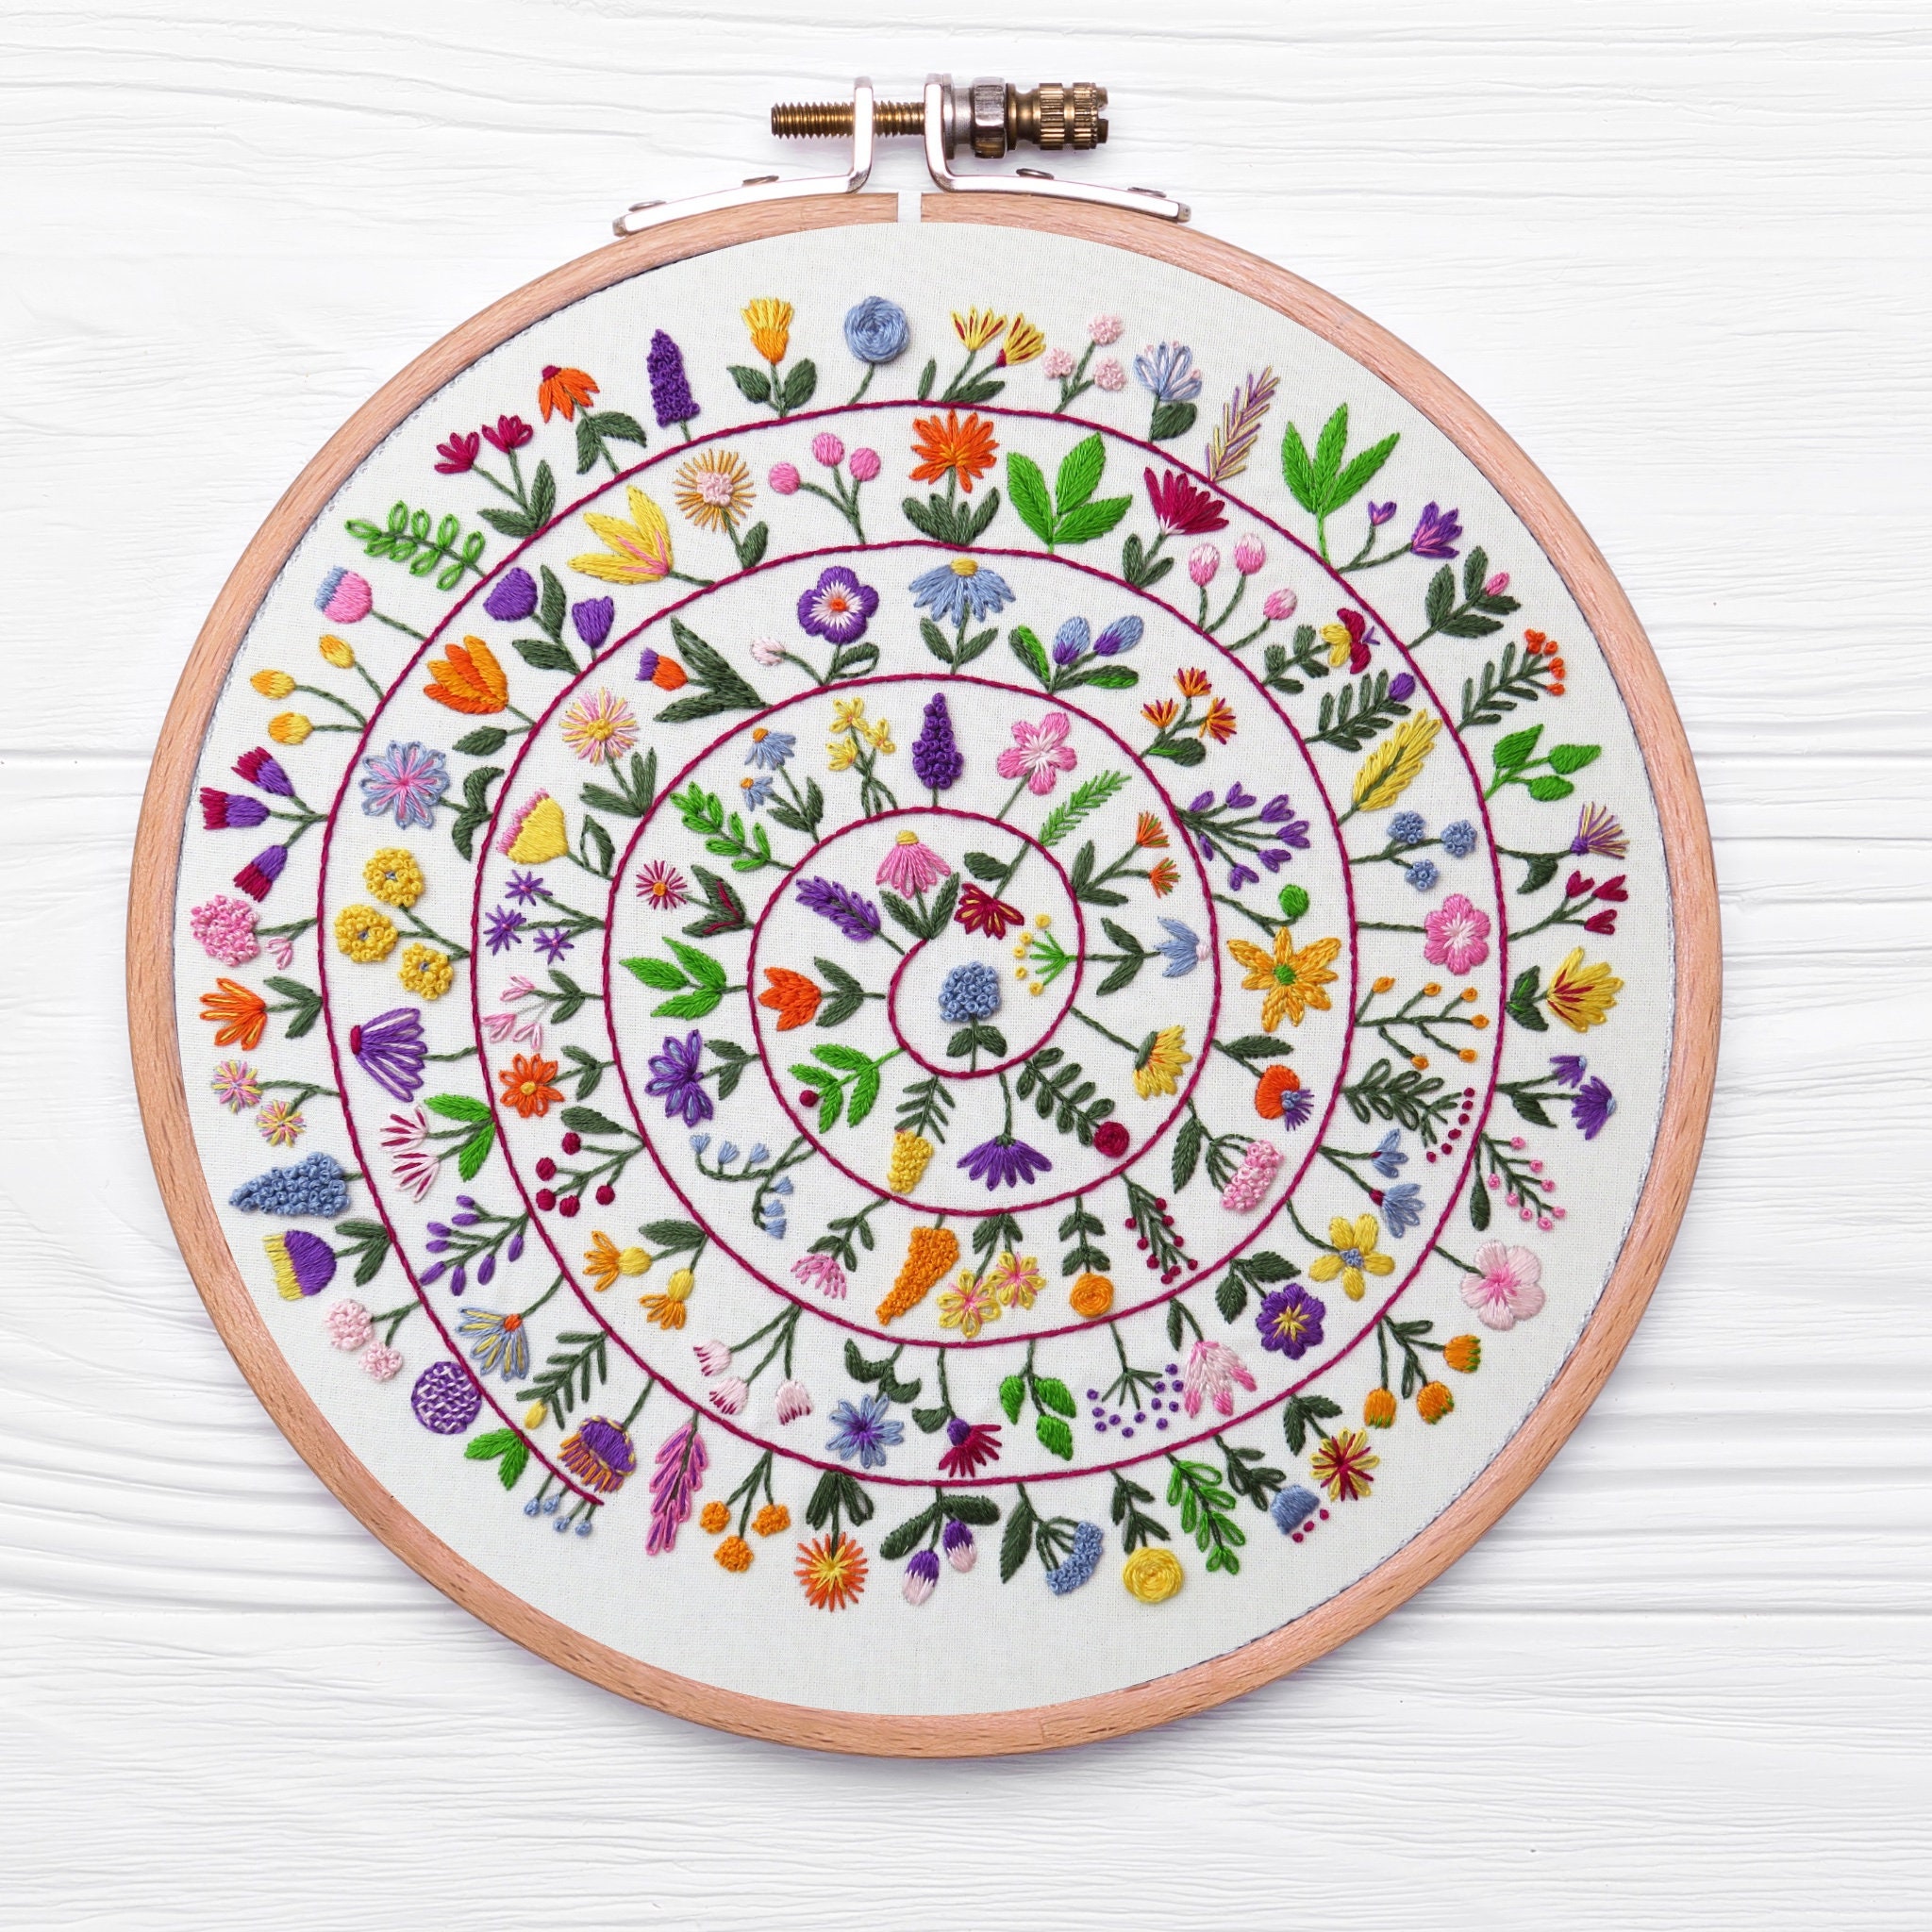 Stamped Embroidery Kit for Beginners,with Pattern and Instructions,Cross  Stitch Kit for Art Craft Handy Sewing Include Embroidery Clothes with  Floral Pattern,Embroidery Hoops,Color Threads and Tools